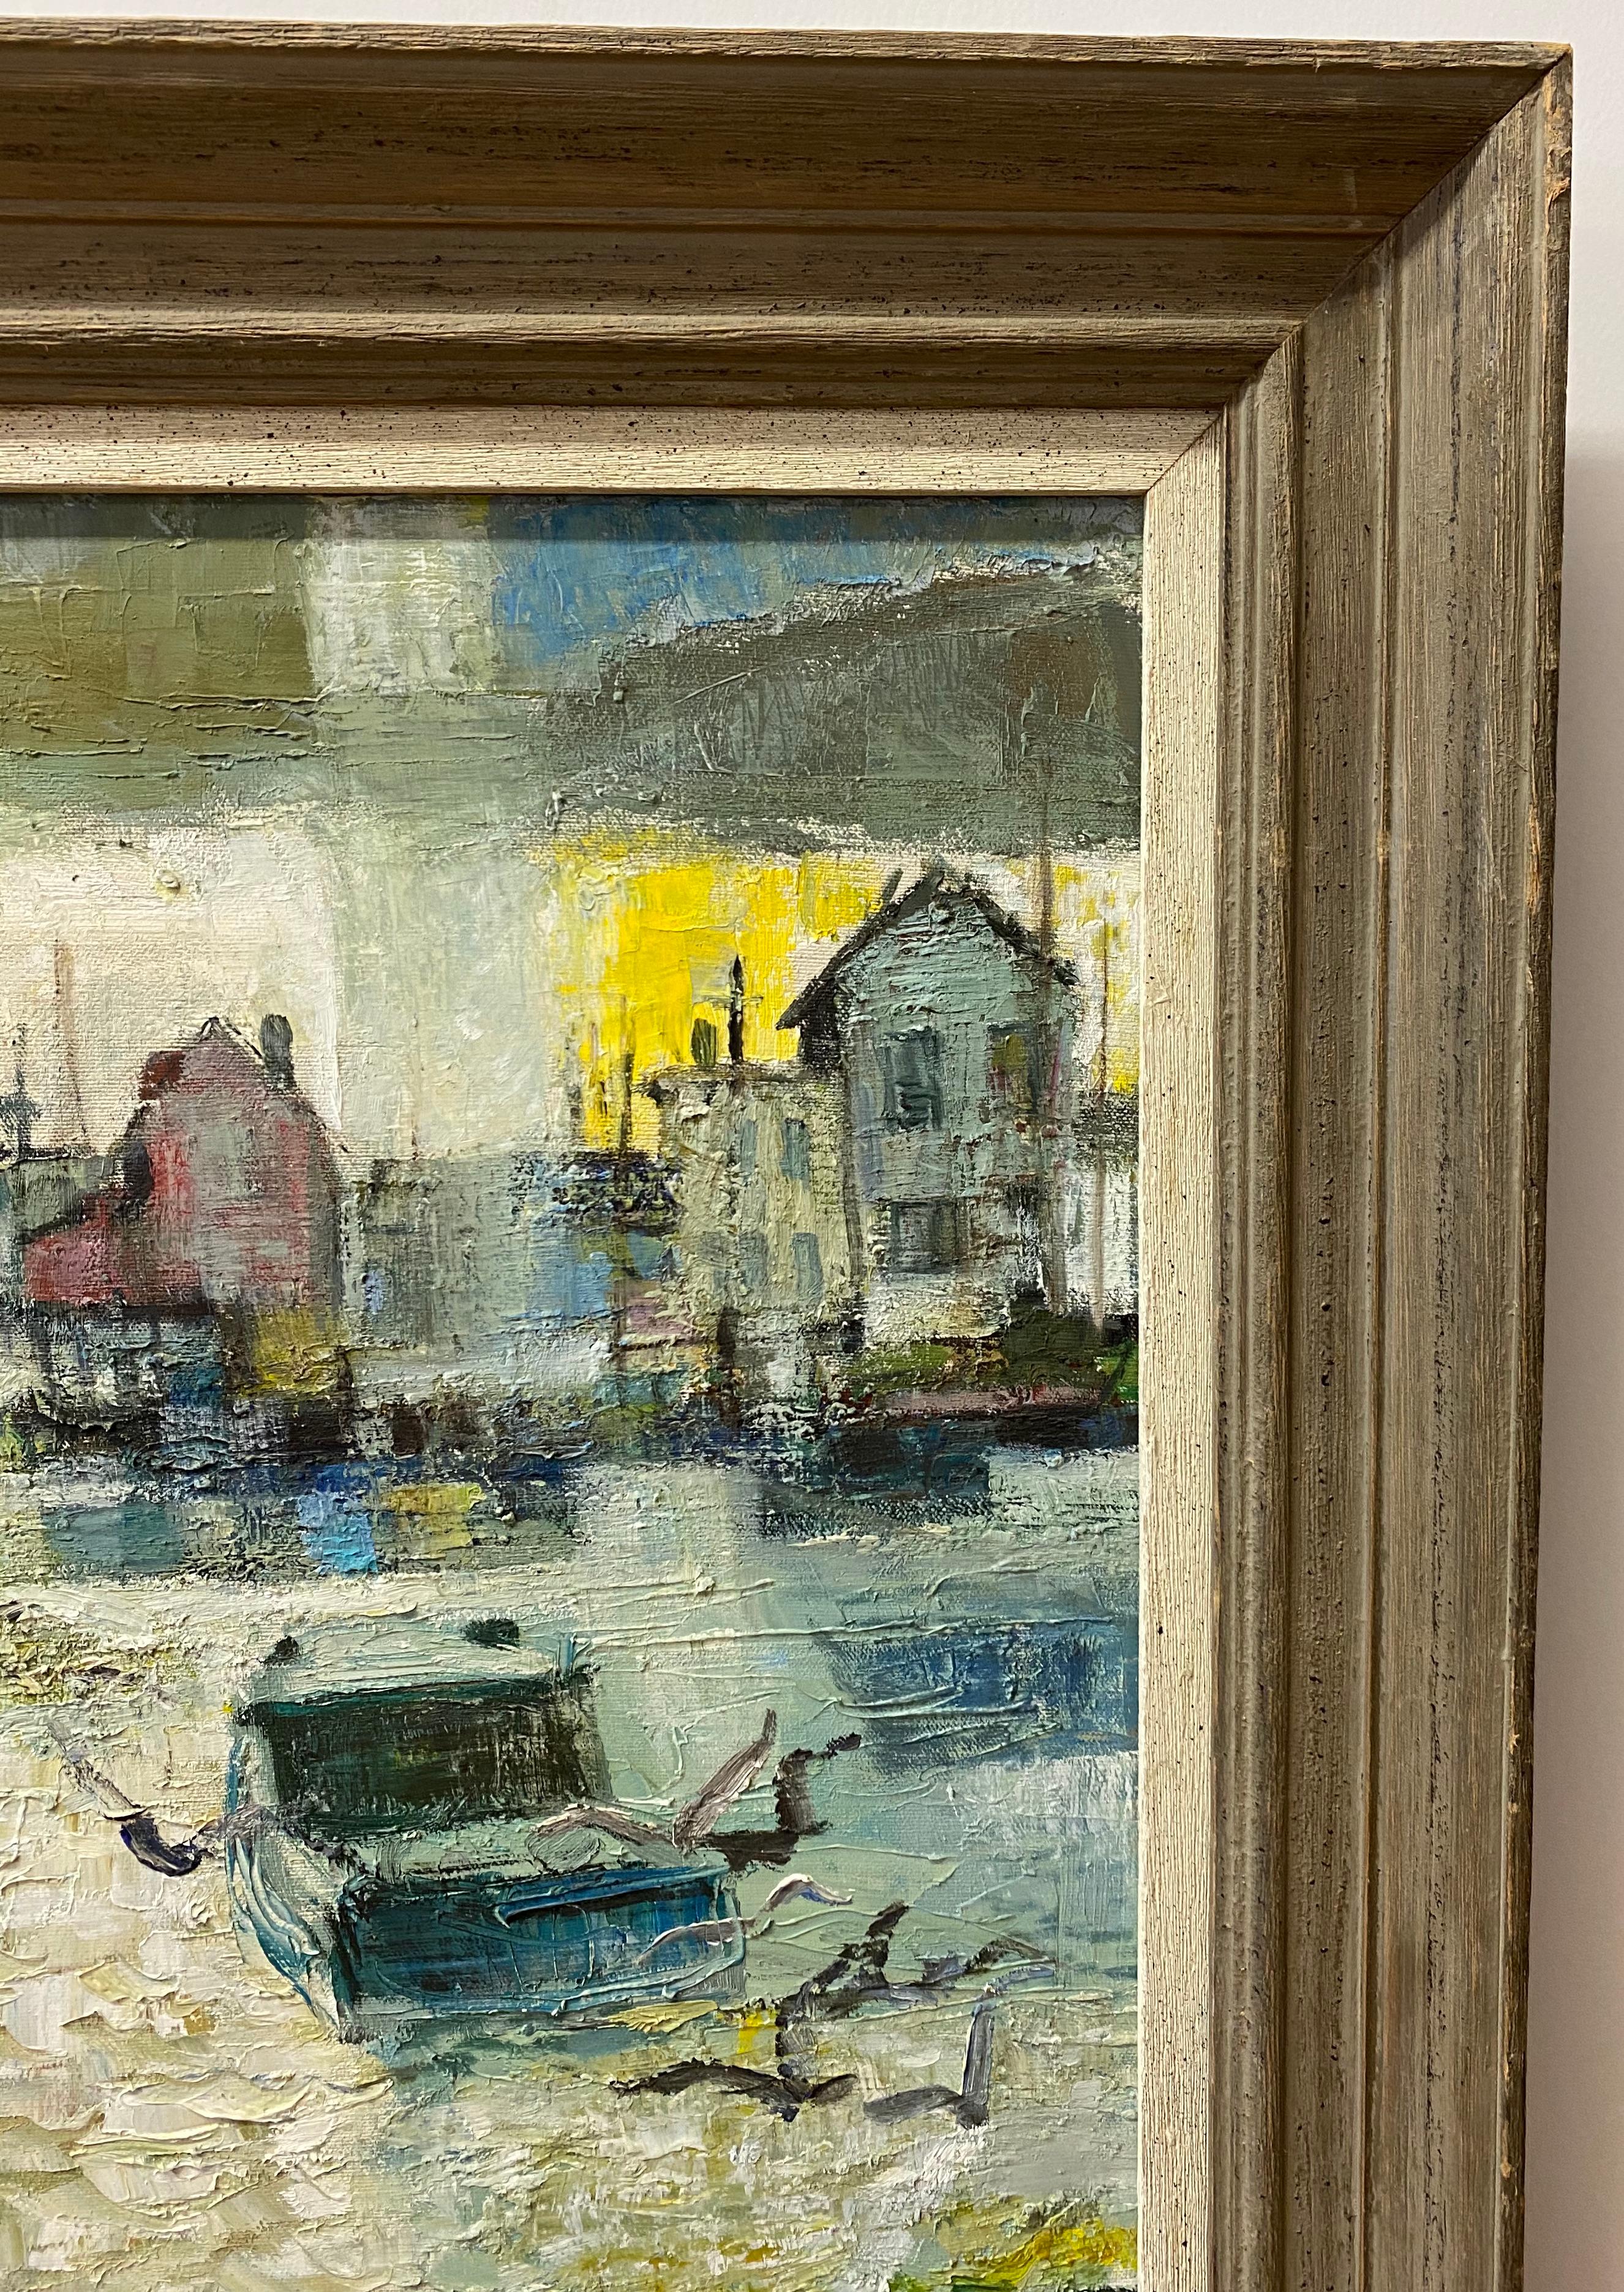 Mid Century Modern Three Figures Dockside Oil Painting c.1950s

Fine mid century oil painting

Signed in the lower right corner - Possibly 